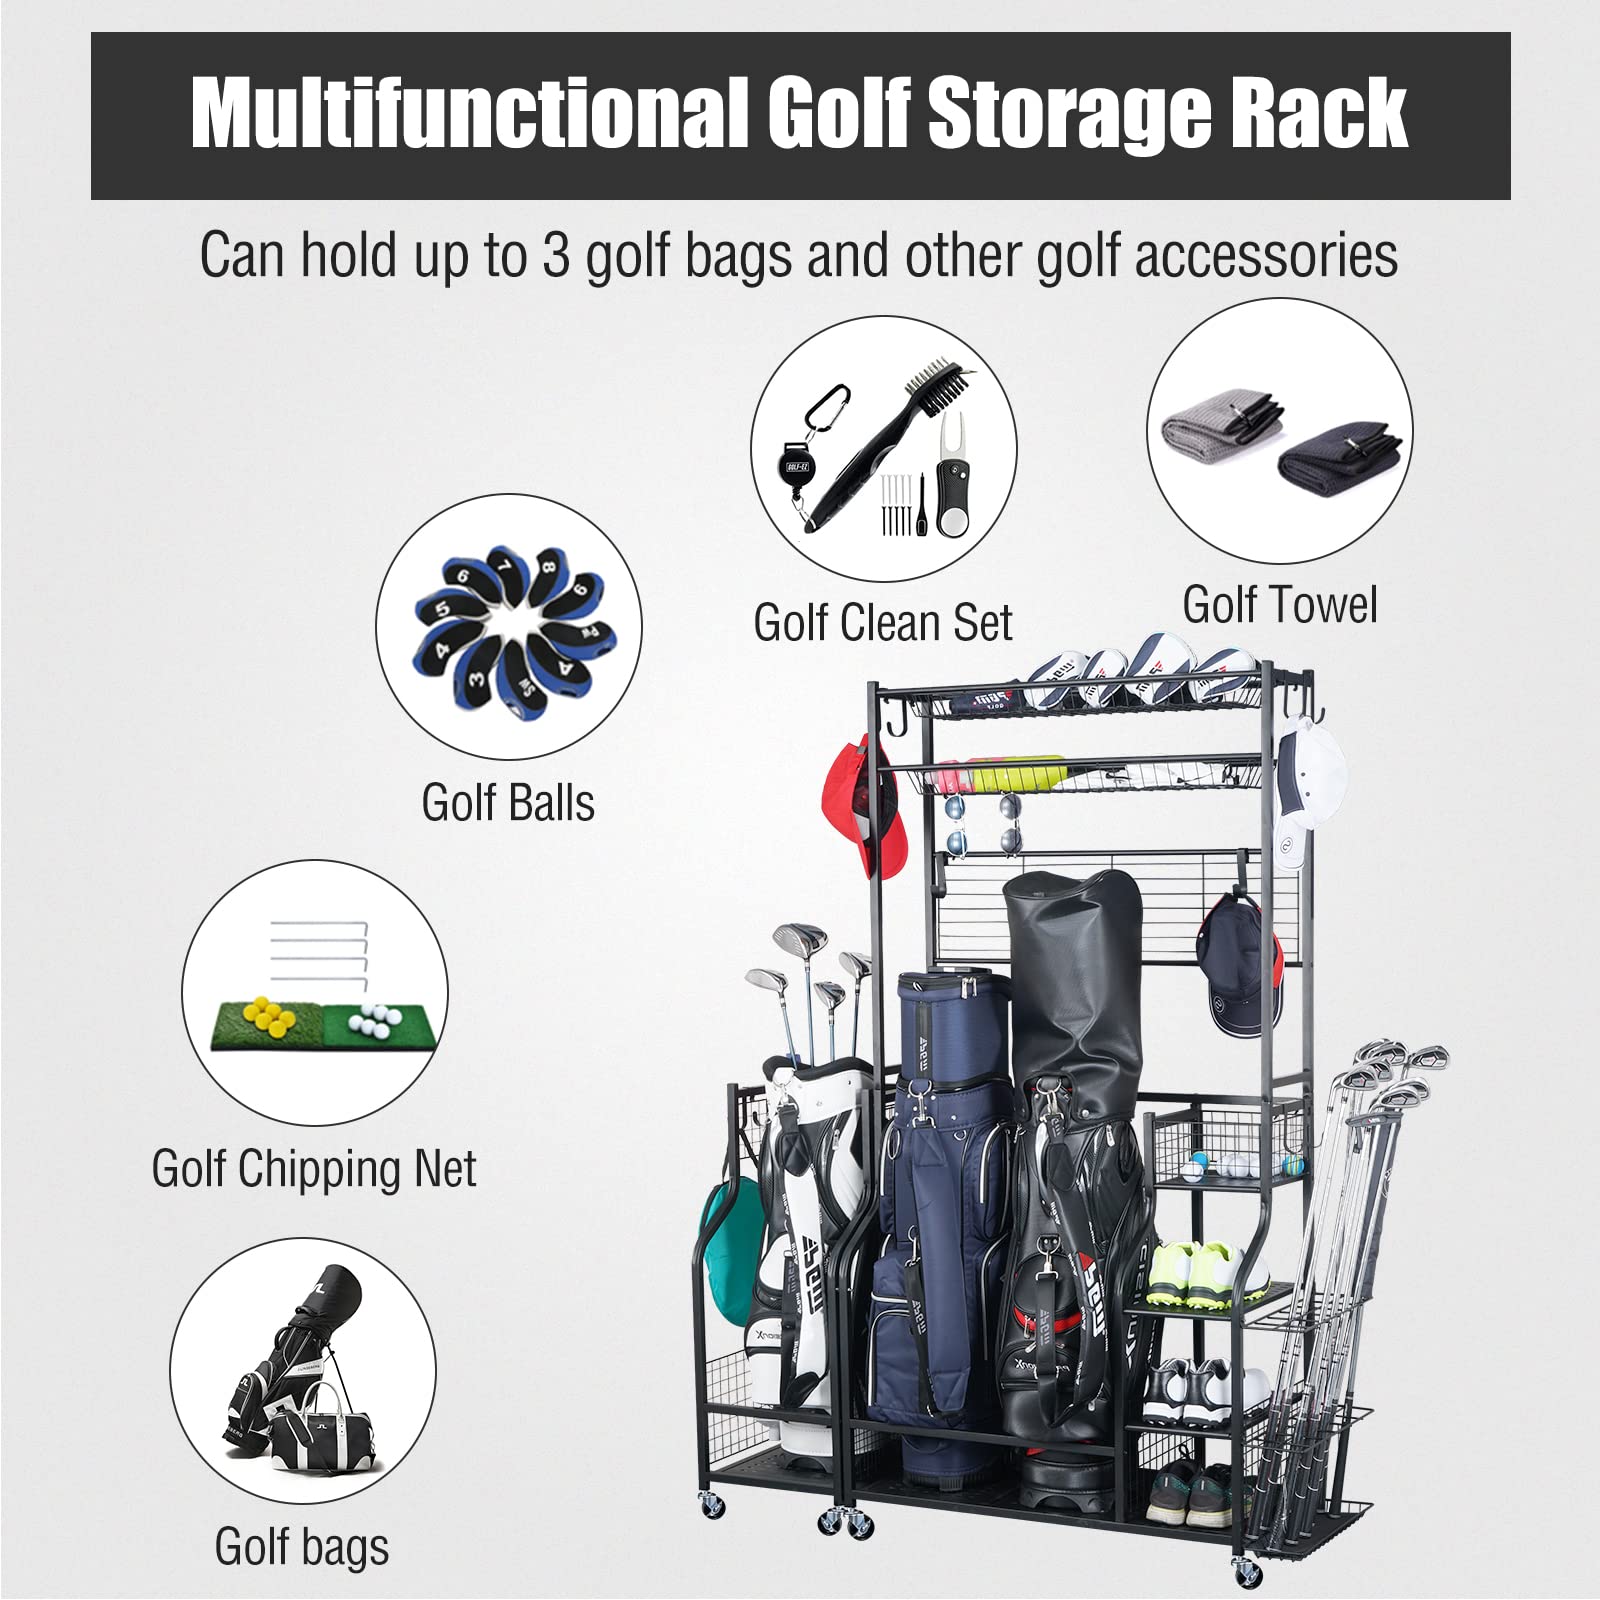 Mythinglogic Golf club Rack for Garage with Extra Golf Bag Rack and To